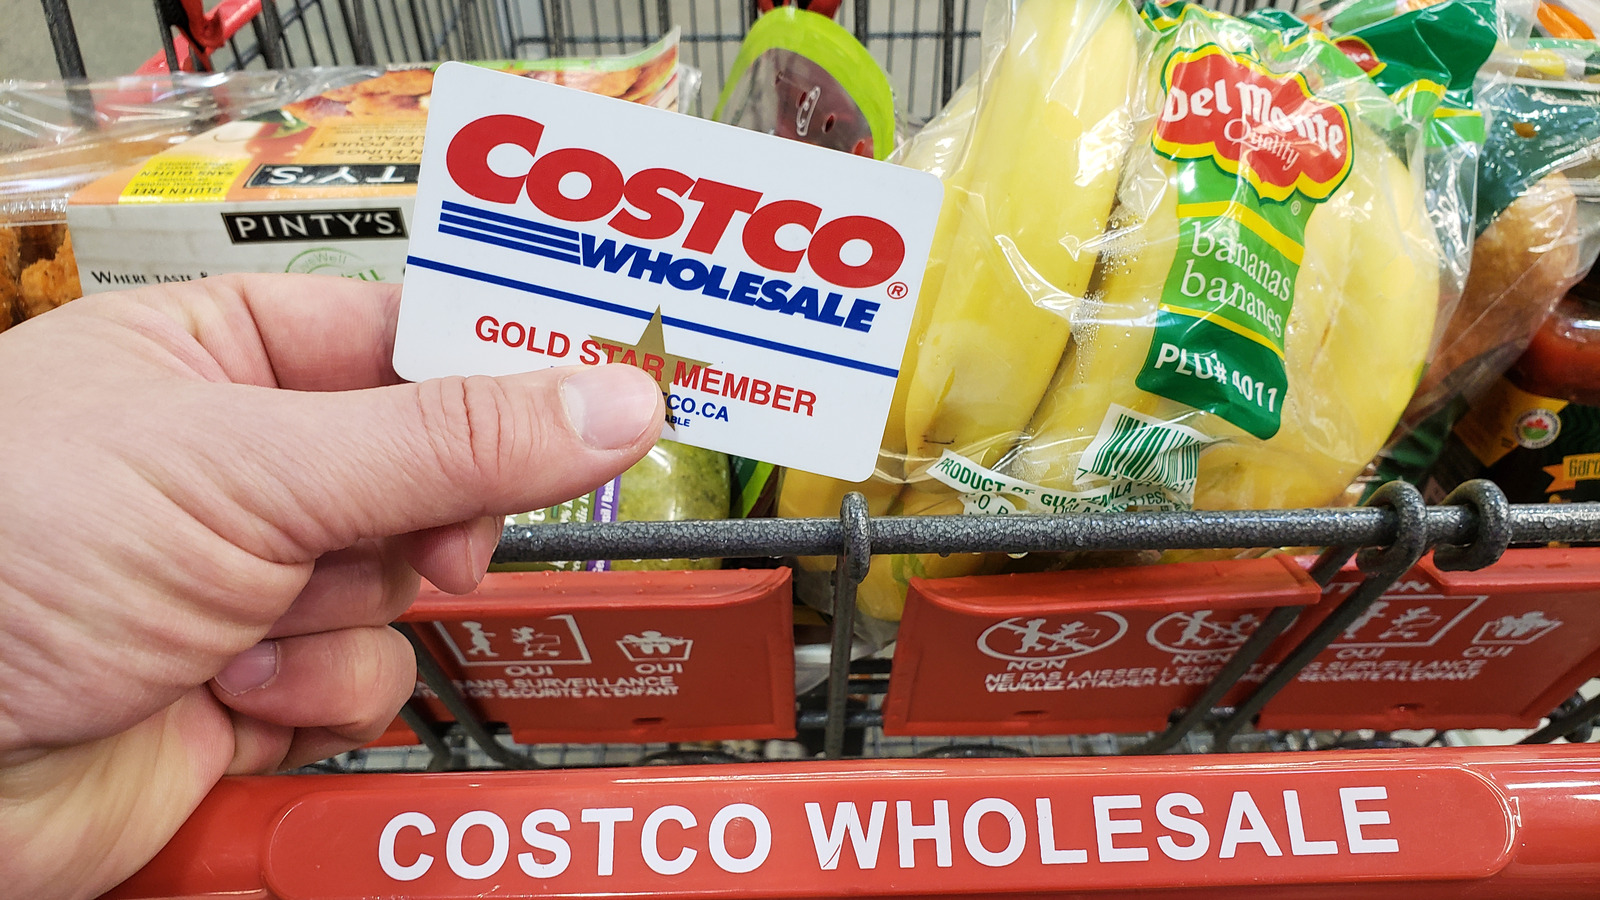 1. "Costco Reddit" - A subreddit dedicated to discussing all things Costco, including discounts and deals - wide 2